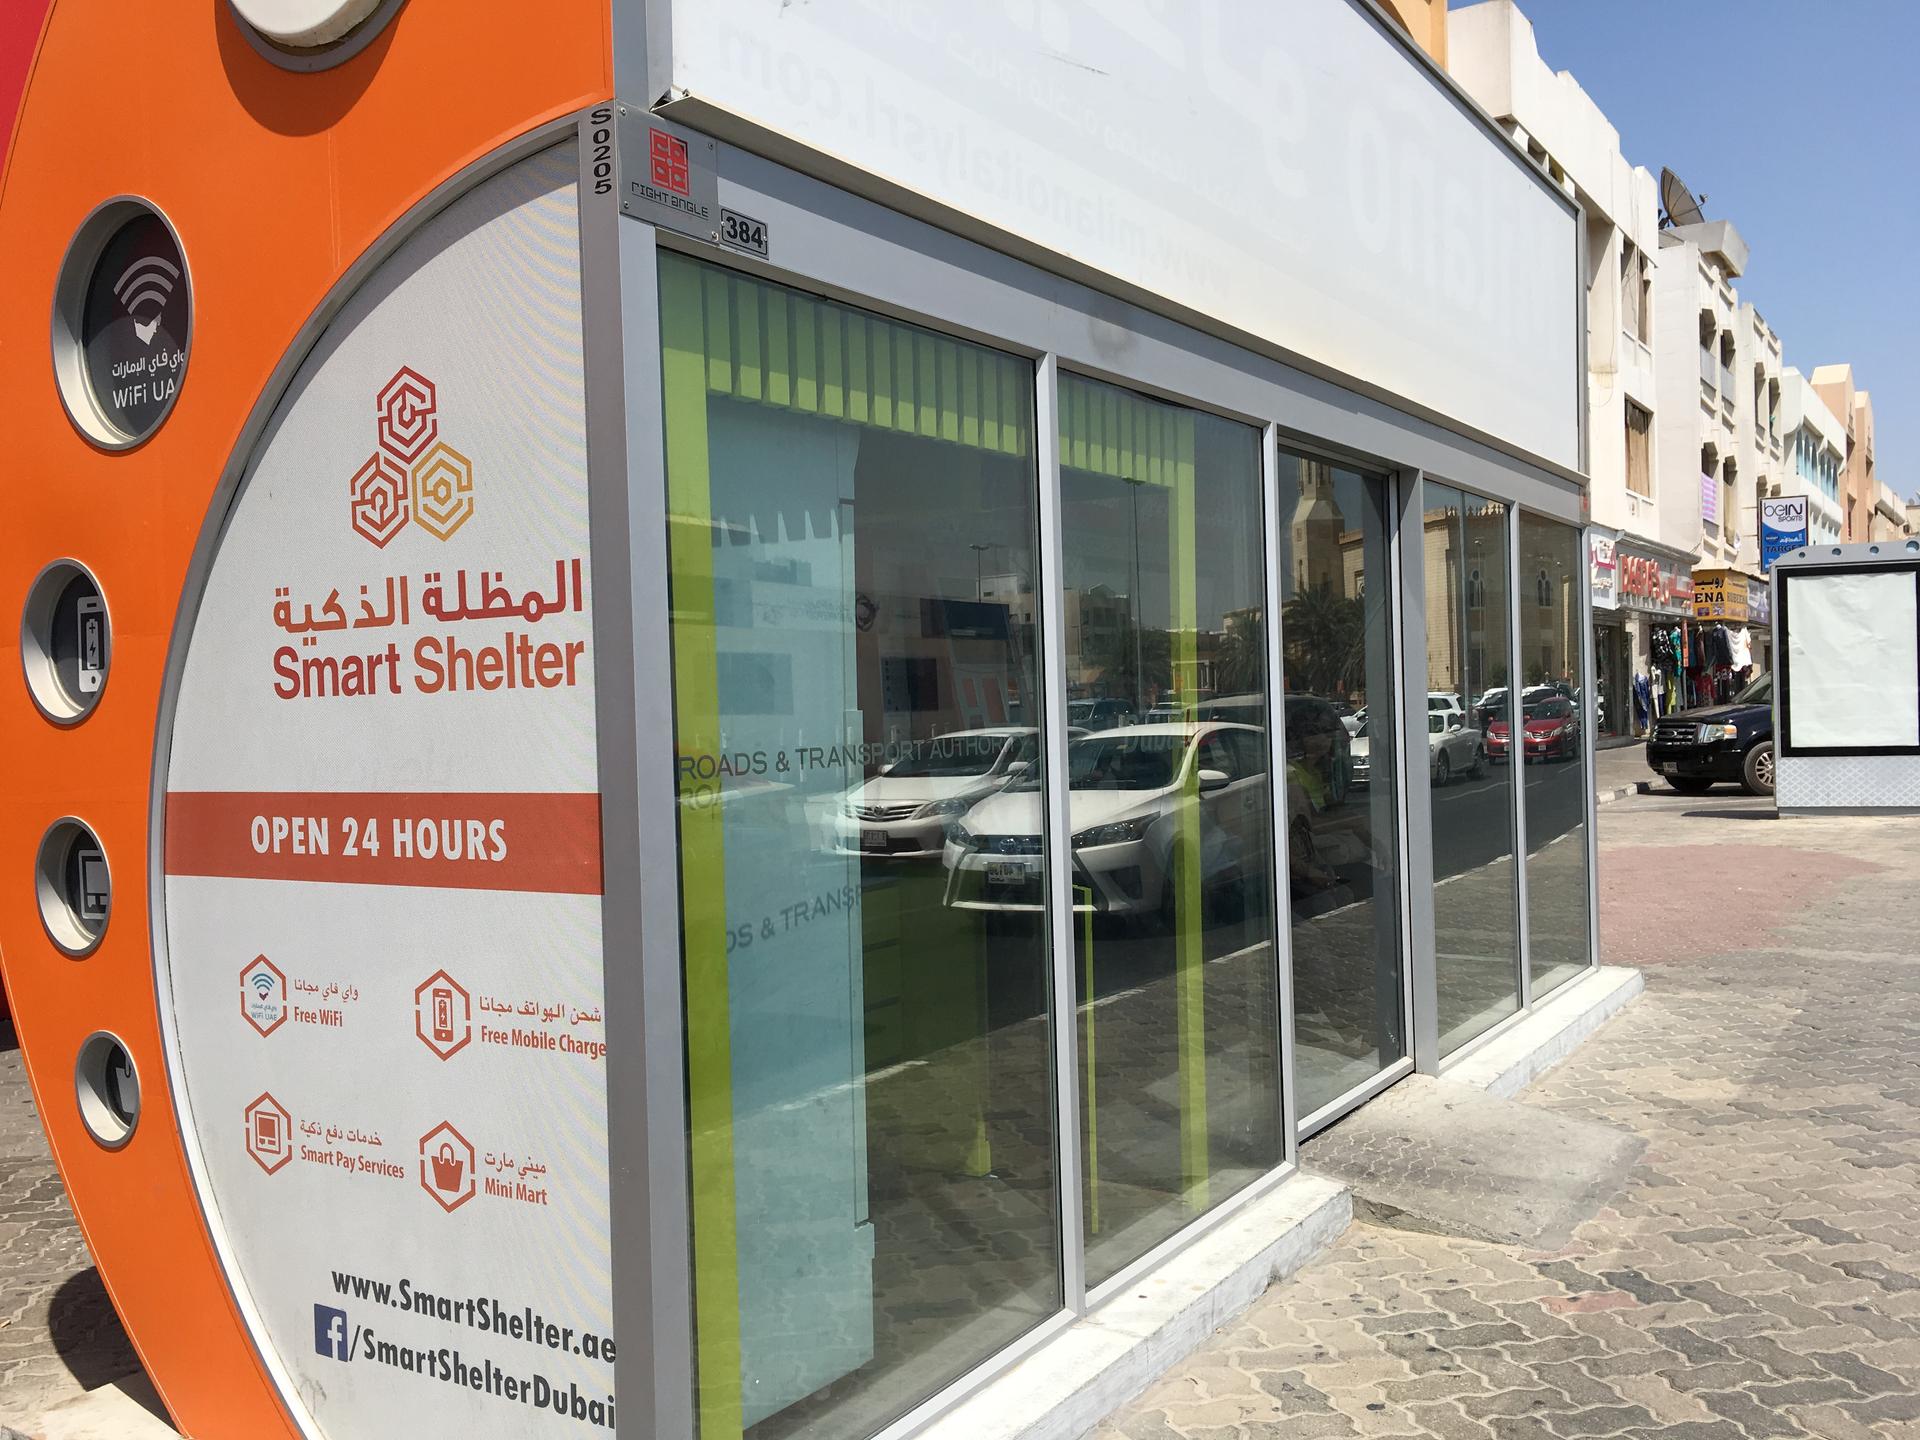 This is an air-conditioned bus stop in Dubai.